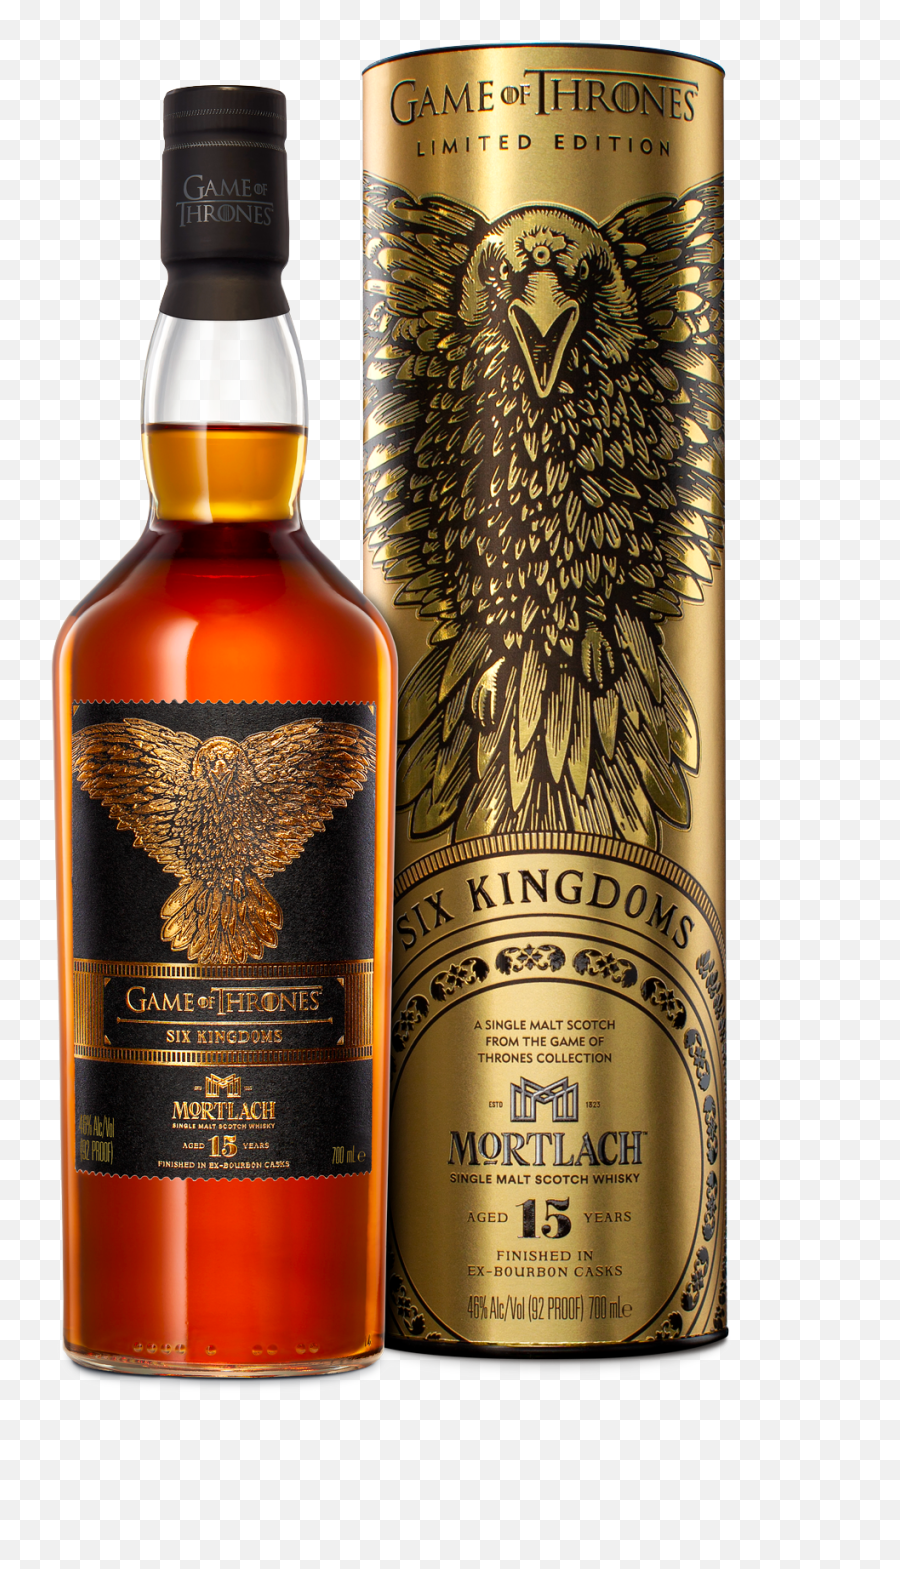 Game Of Thrones Whisky Collection Maltscom - Game Of Thrones Whisky Mortlach Emoji,Game Of Thrones Png